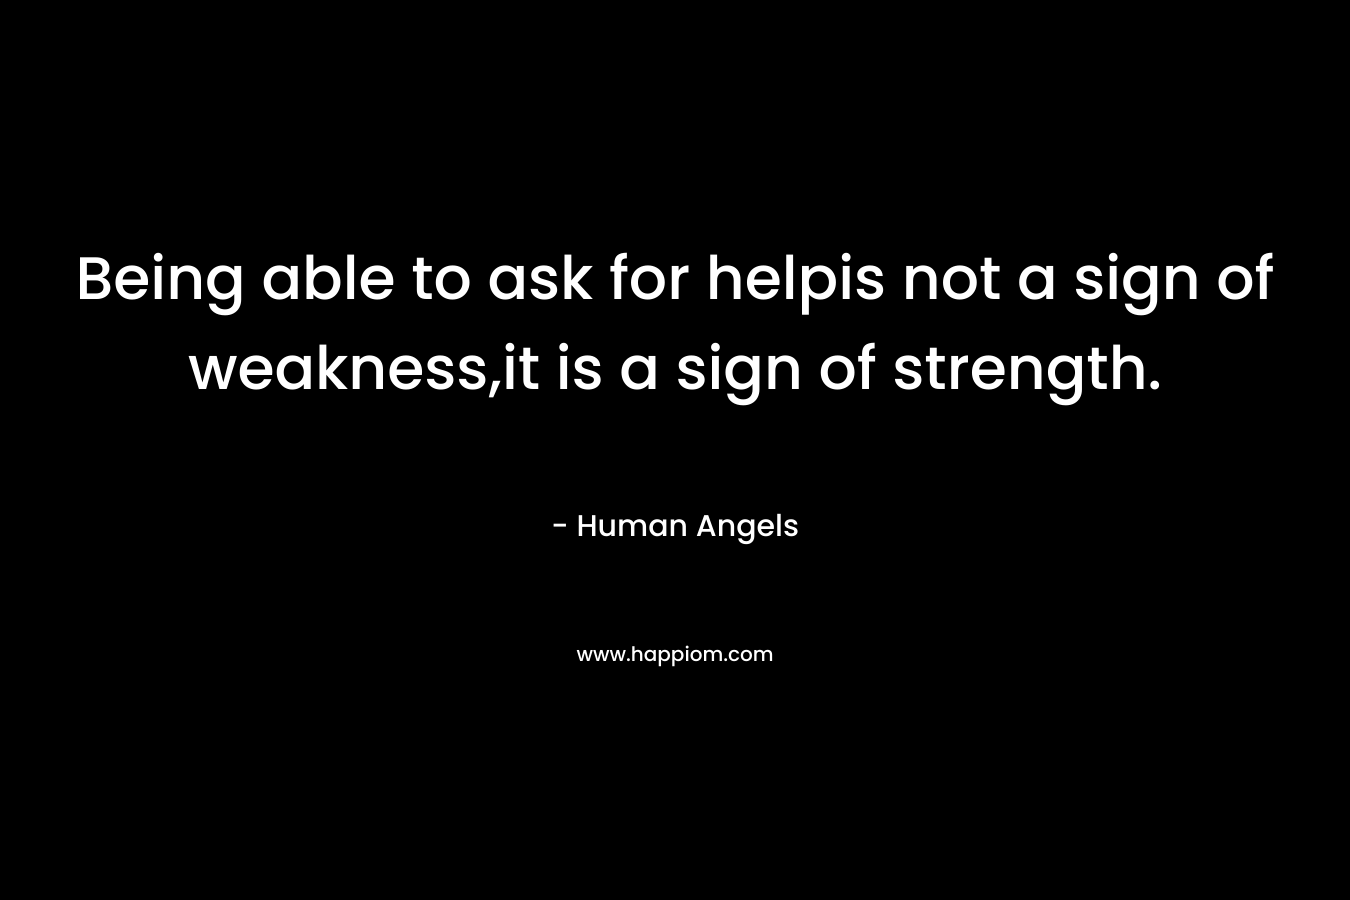 Being able to ask for helpis not a sign of weakness,it is a sign of strength.